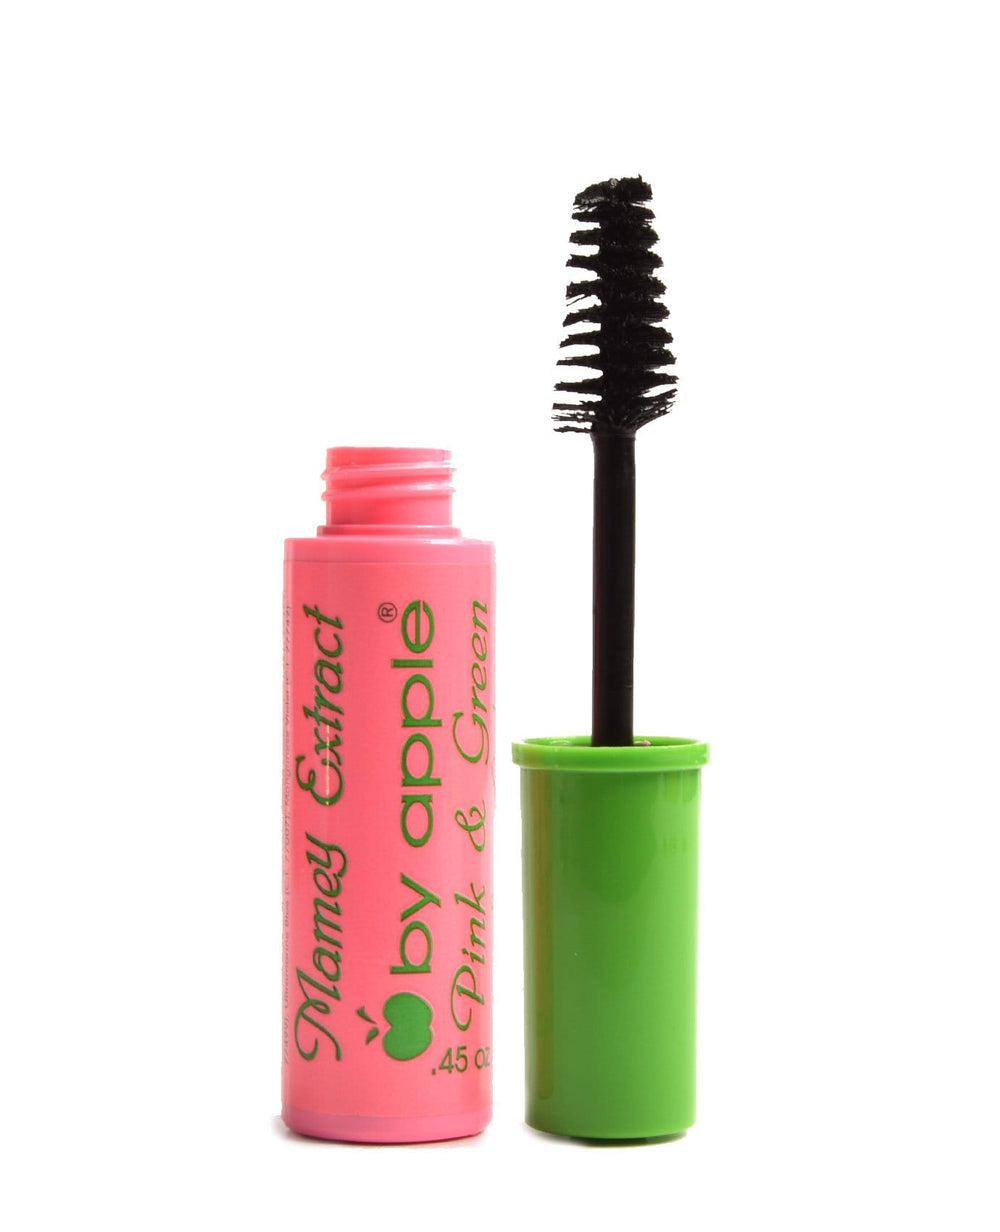 By Apple pink and green mascara